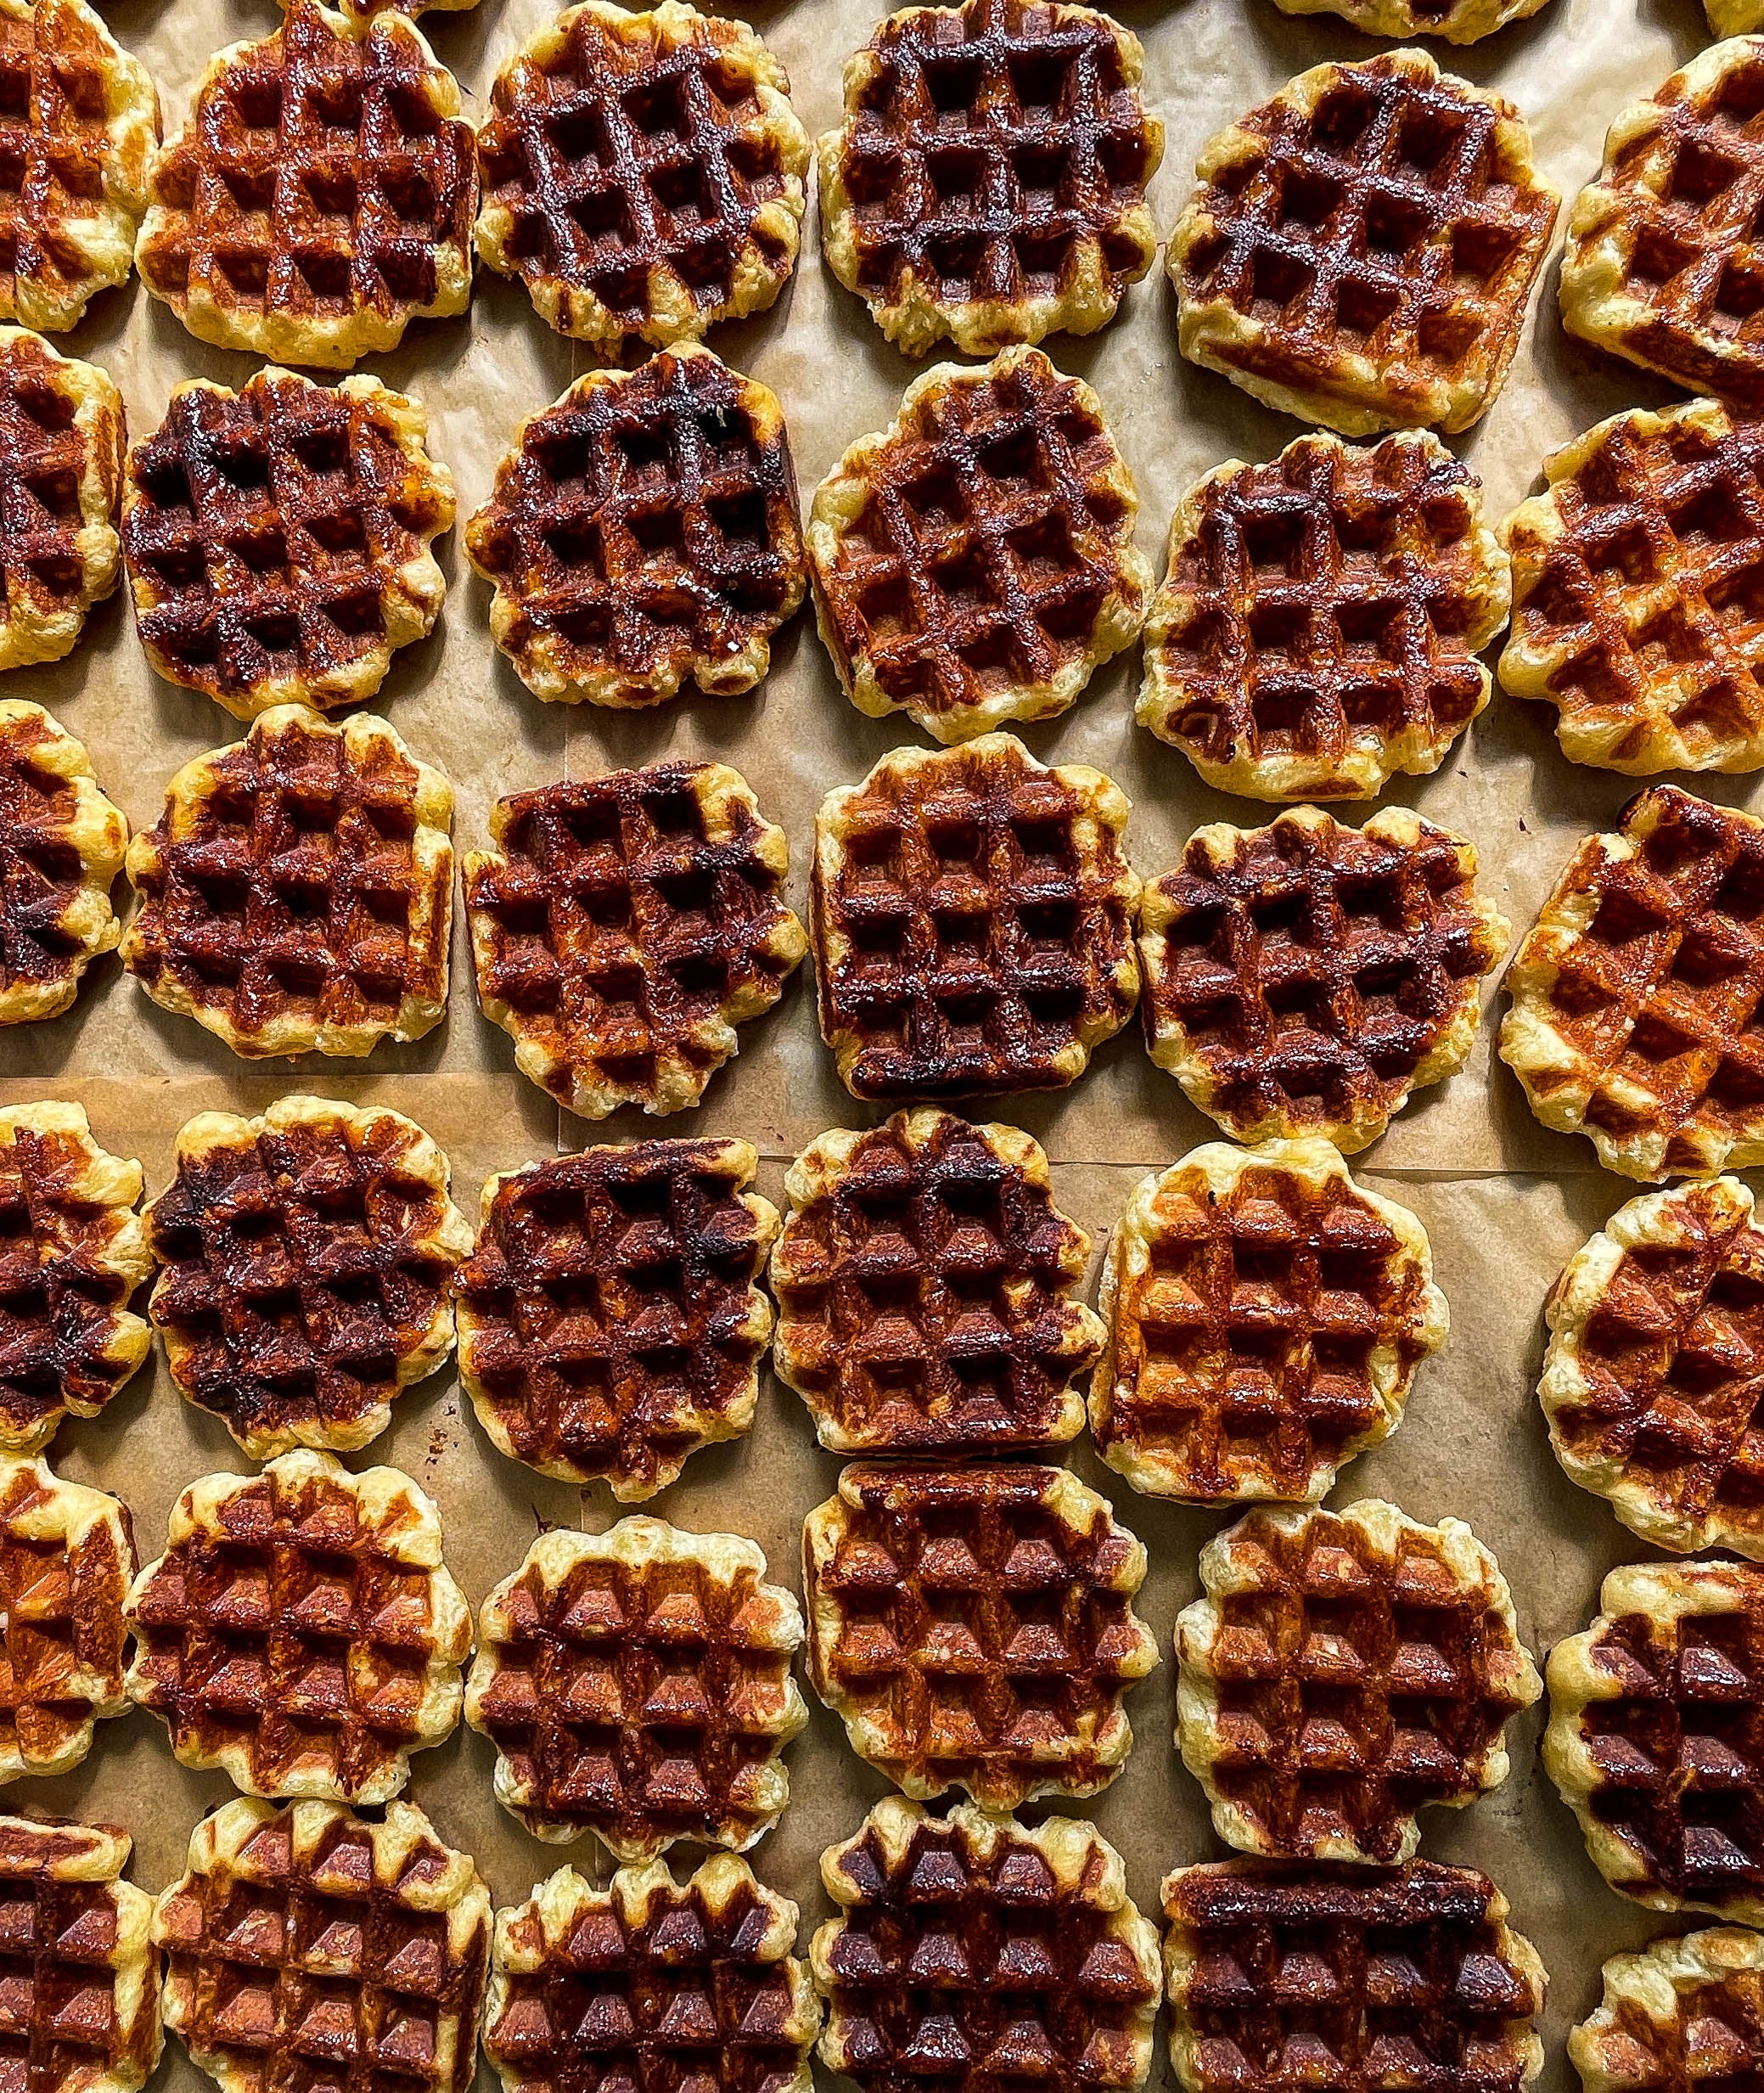 Pack of 3 Liege Waffle